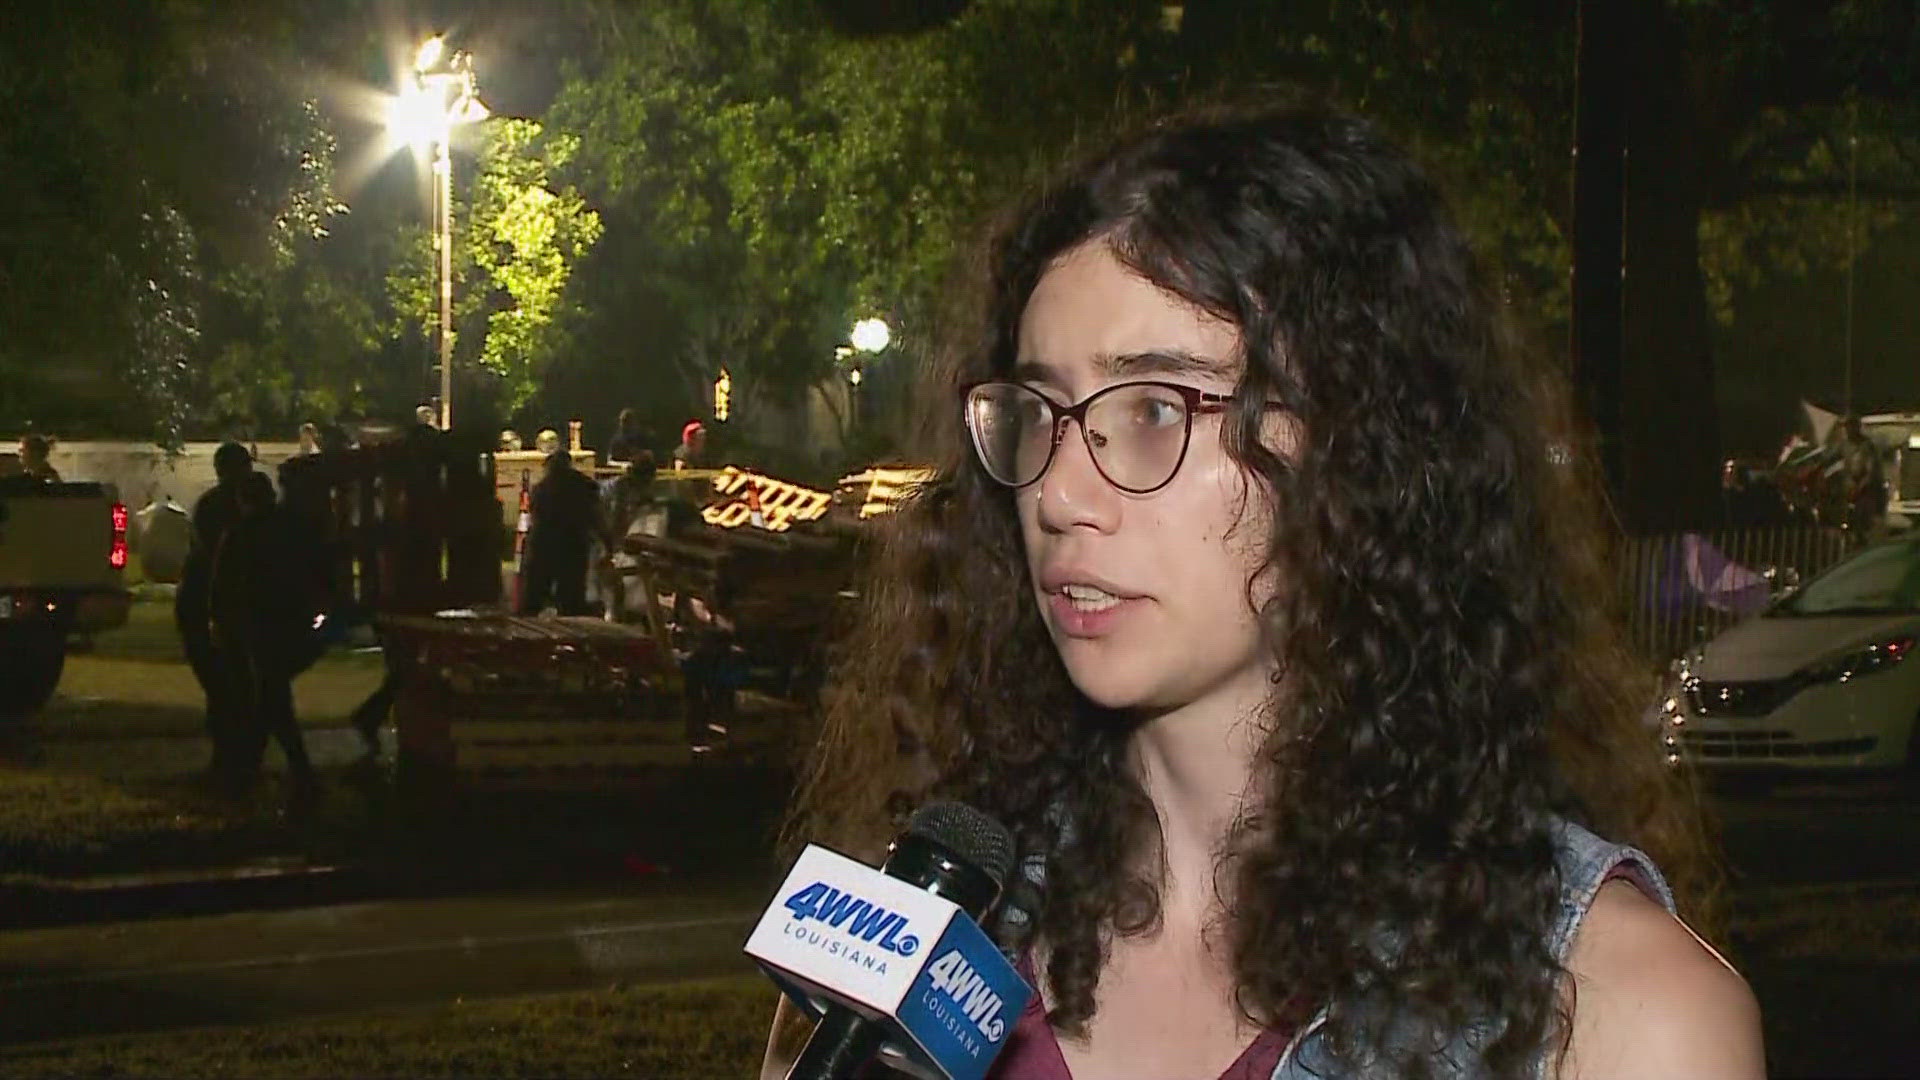 Serena Sojic-Borne, a Tulane alum and an organizer with the Freedom Road Socialist Organization said protesters weren't given any warning and were overwhelmed.